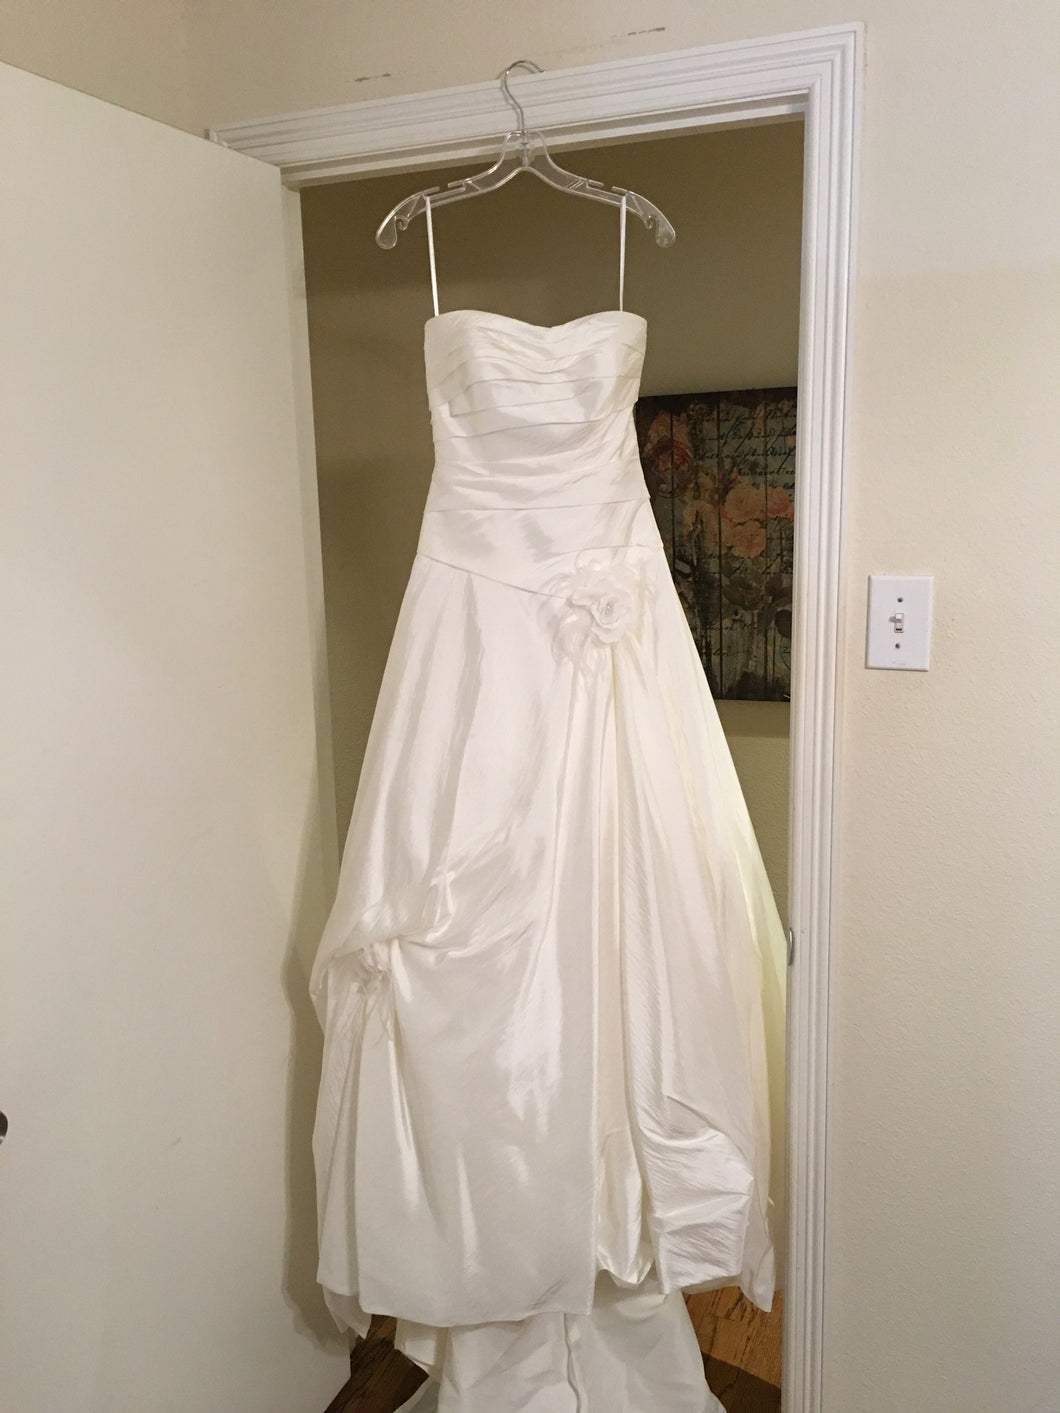 2Be Bride 'Beaded' - 2Be Bride - Nearly Newlywed Bridal Boutique - 1